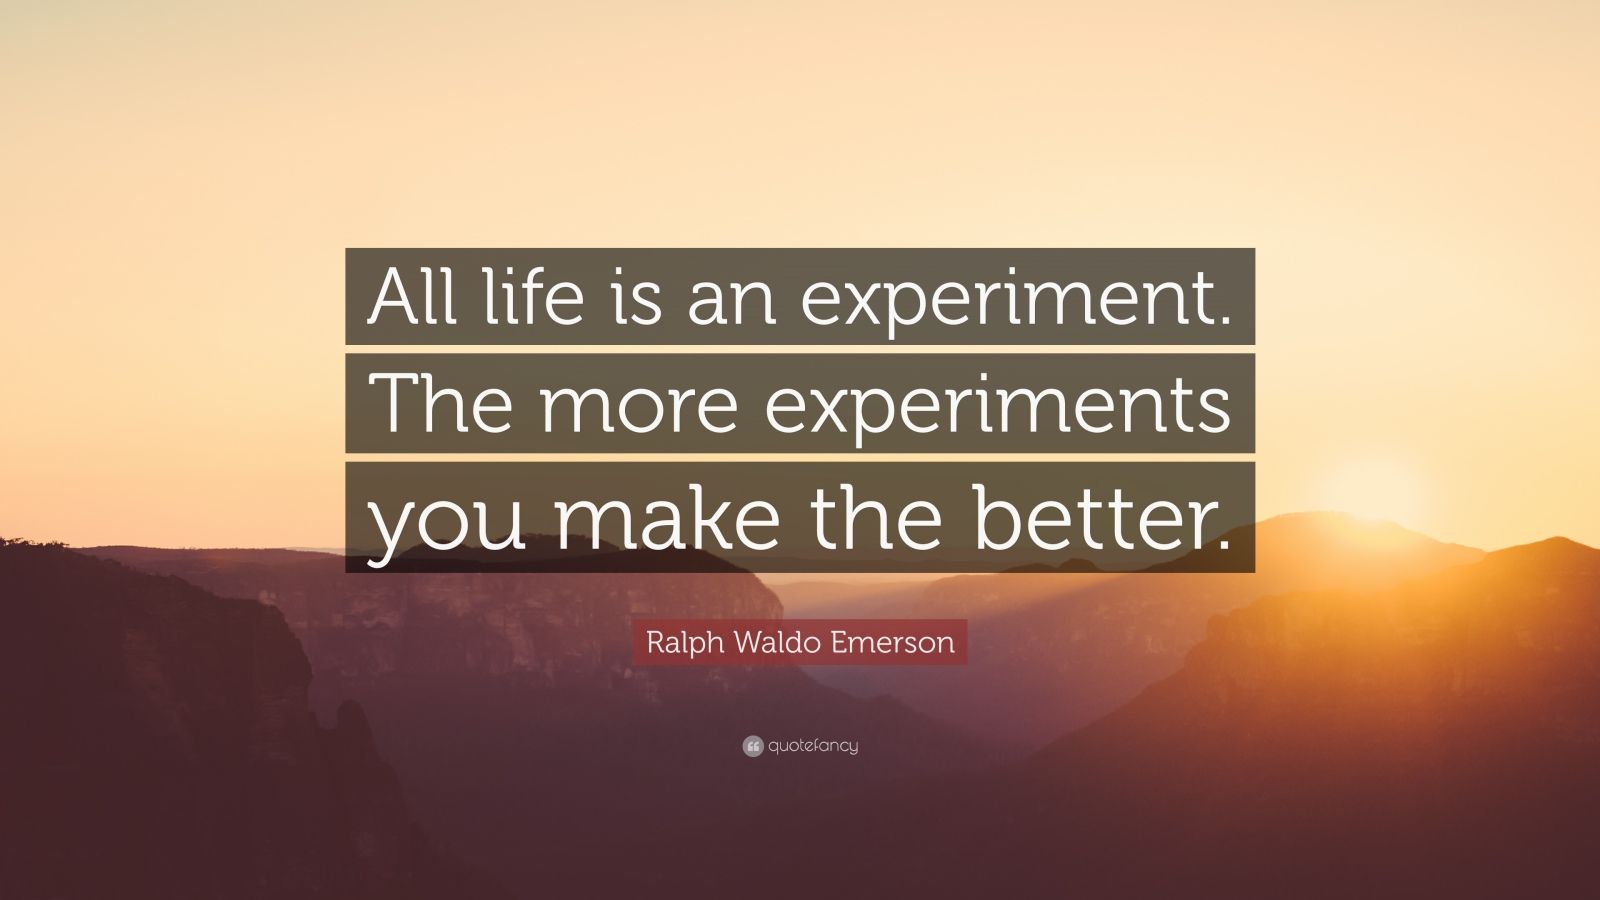 Ralph Waldo Emerson Quote: “All life is an experiment. The more